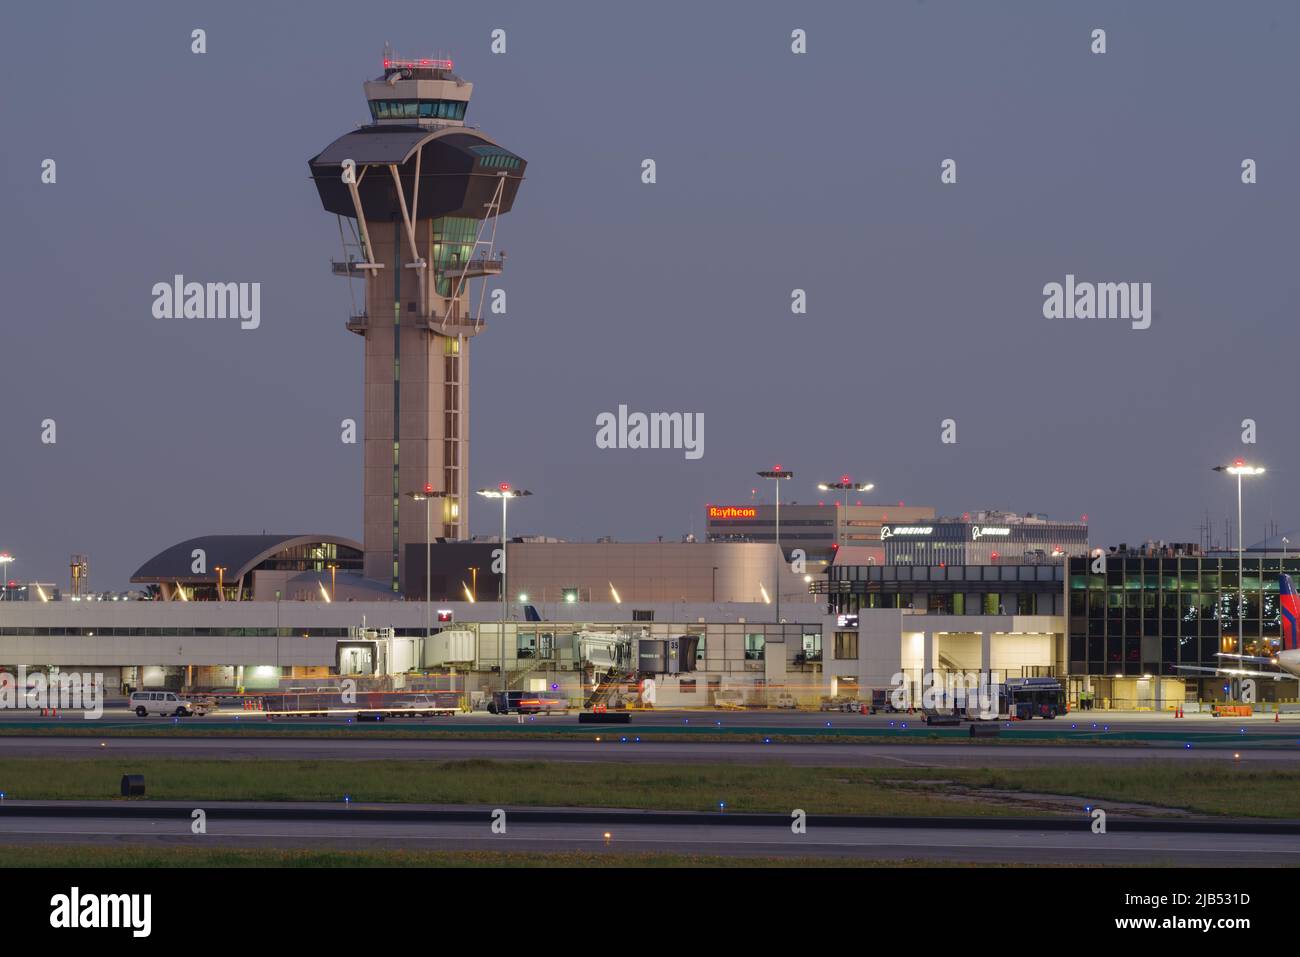 Los Angeles International Airport control tower and runway shown at dusk in  California, USA on March 17, 2019. Stock Photo